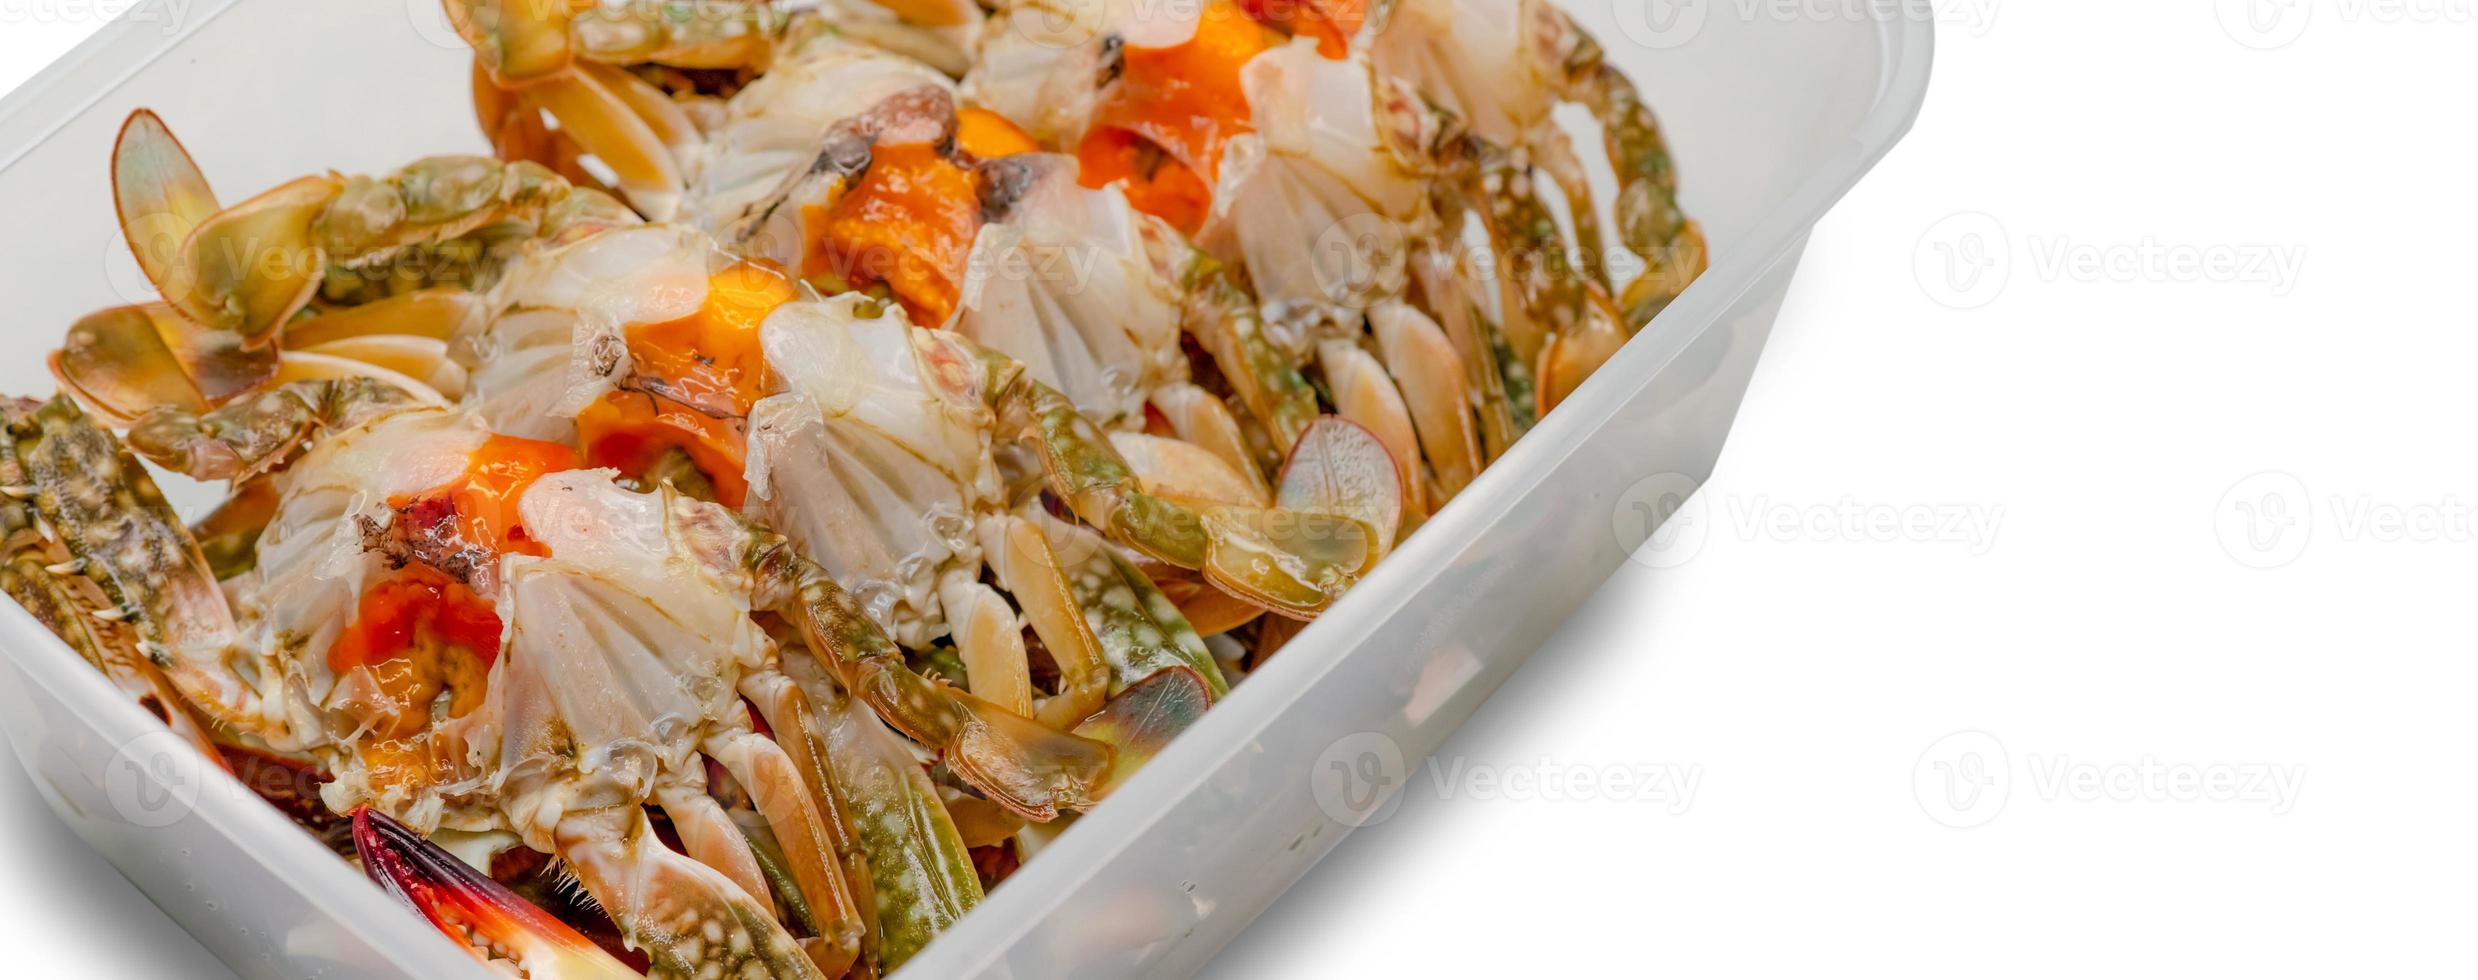 Pickled crab eggs in fish sauce pack in plastic box for delivery. Seafood delivery business. Exotic menu in Thailand. Pickled crab eggs in disposable plastic container isolated. Sea food industry. photo